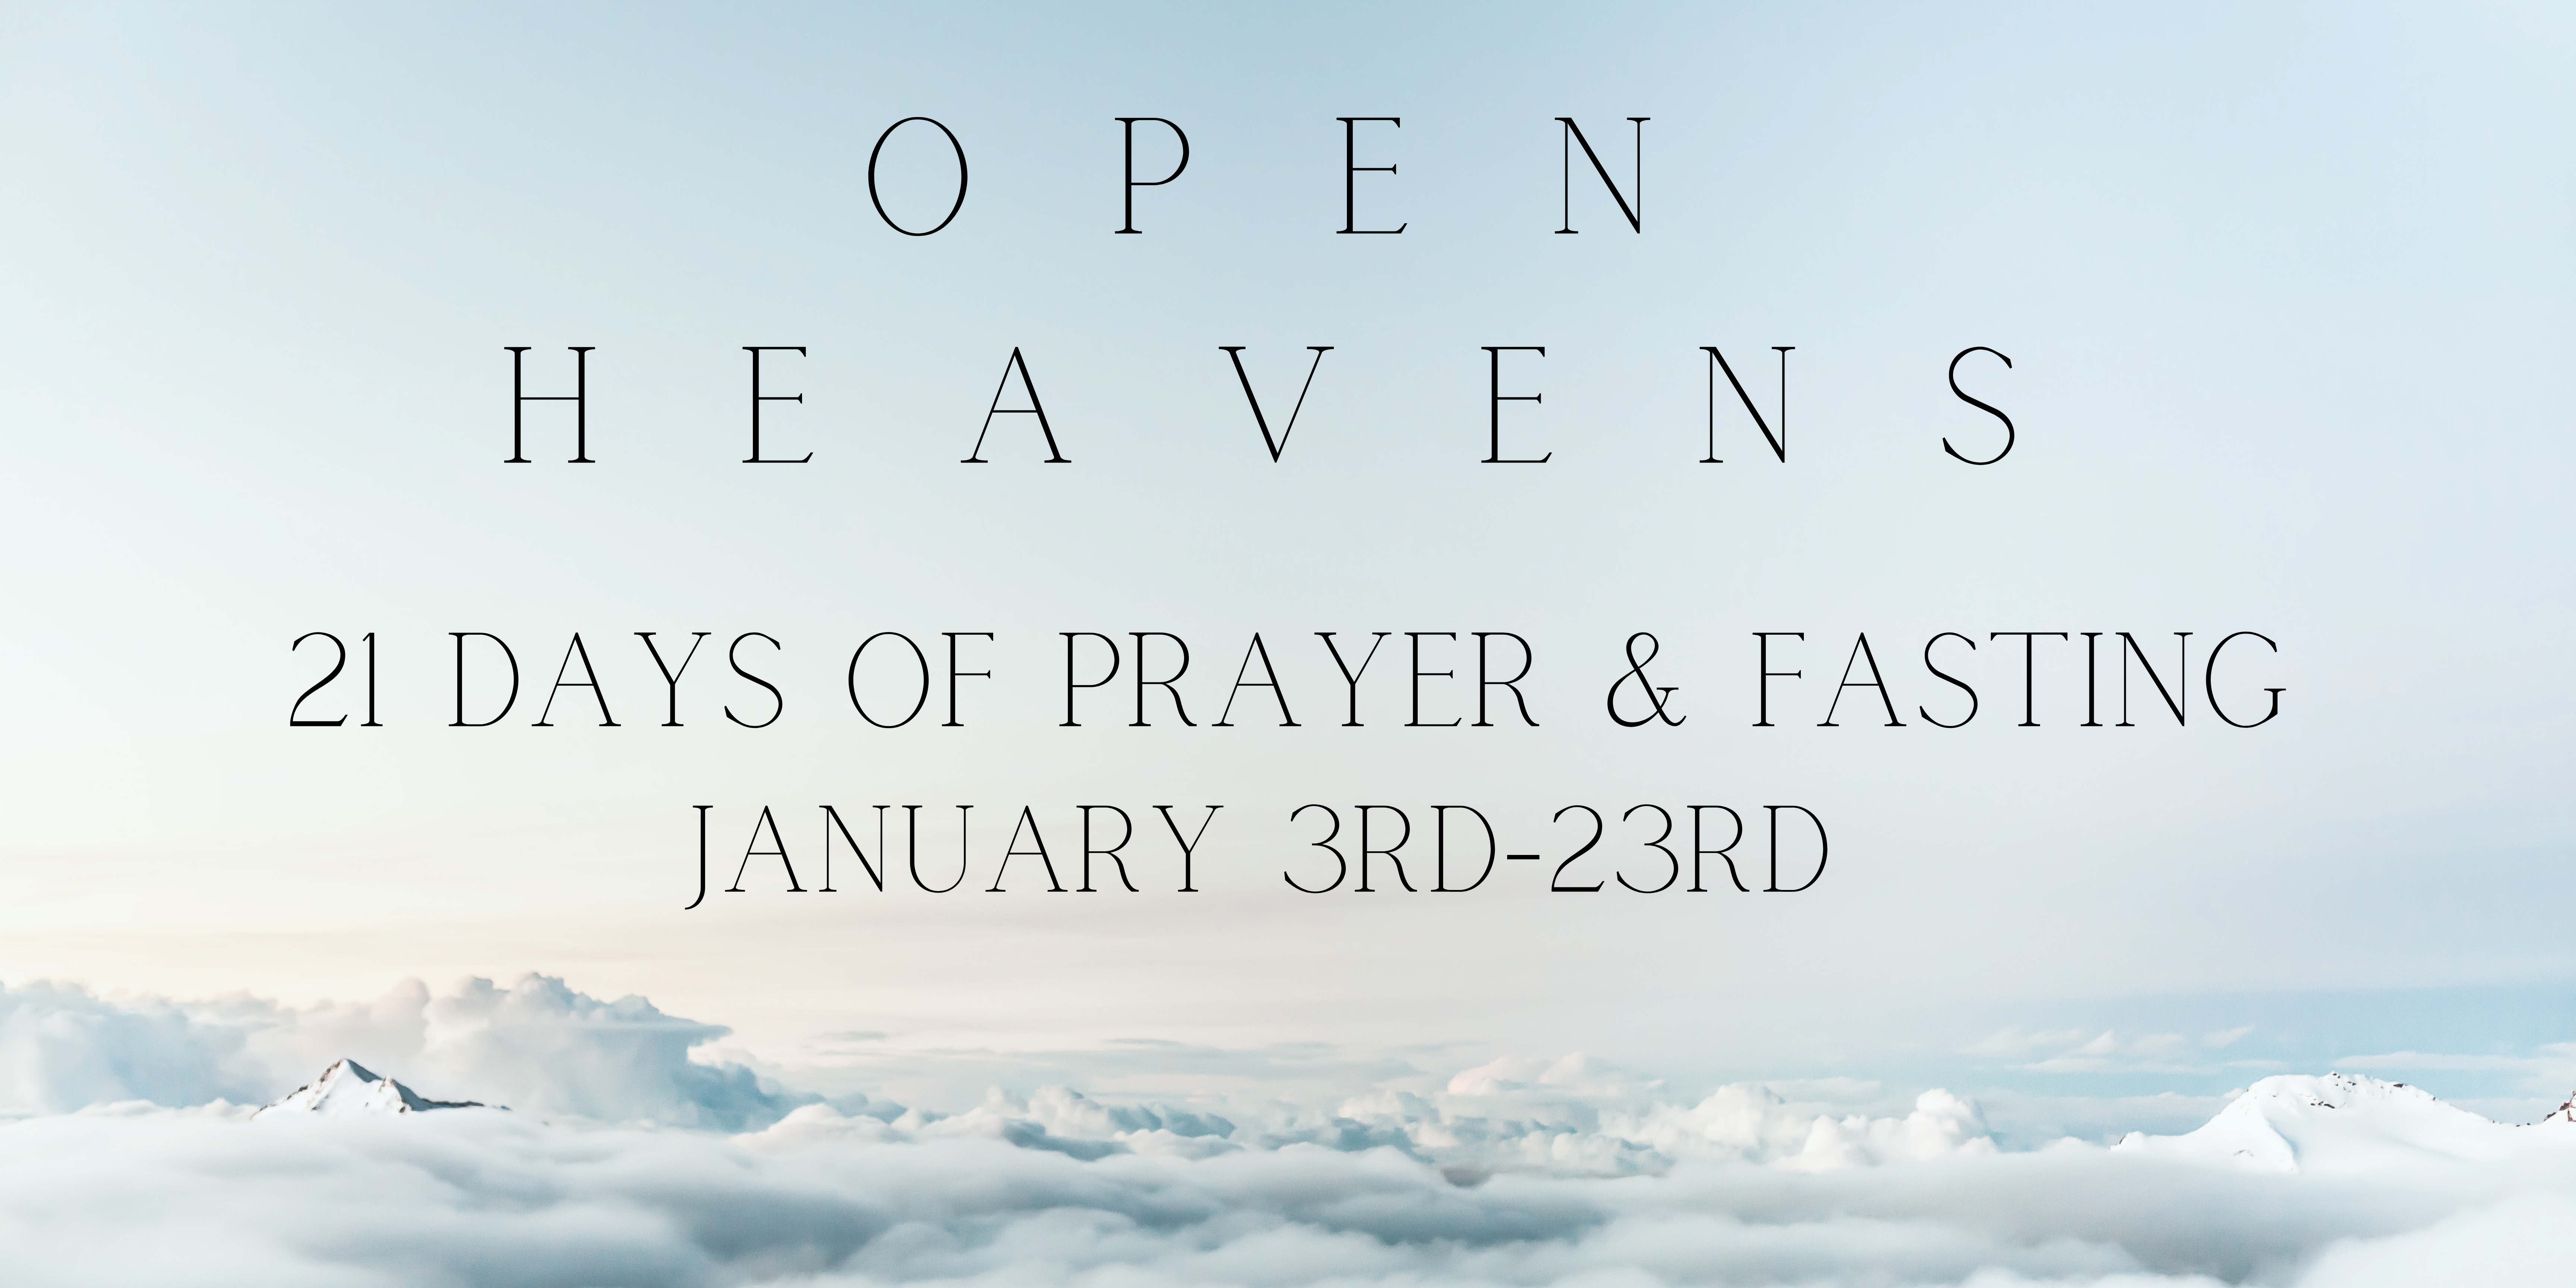 Open Heavens: 21 Days of Prayer and Fasting to Start the New Year!